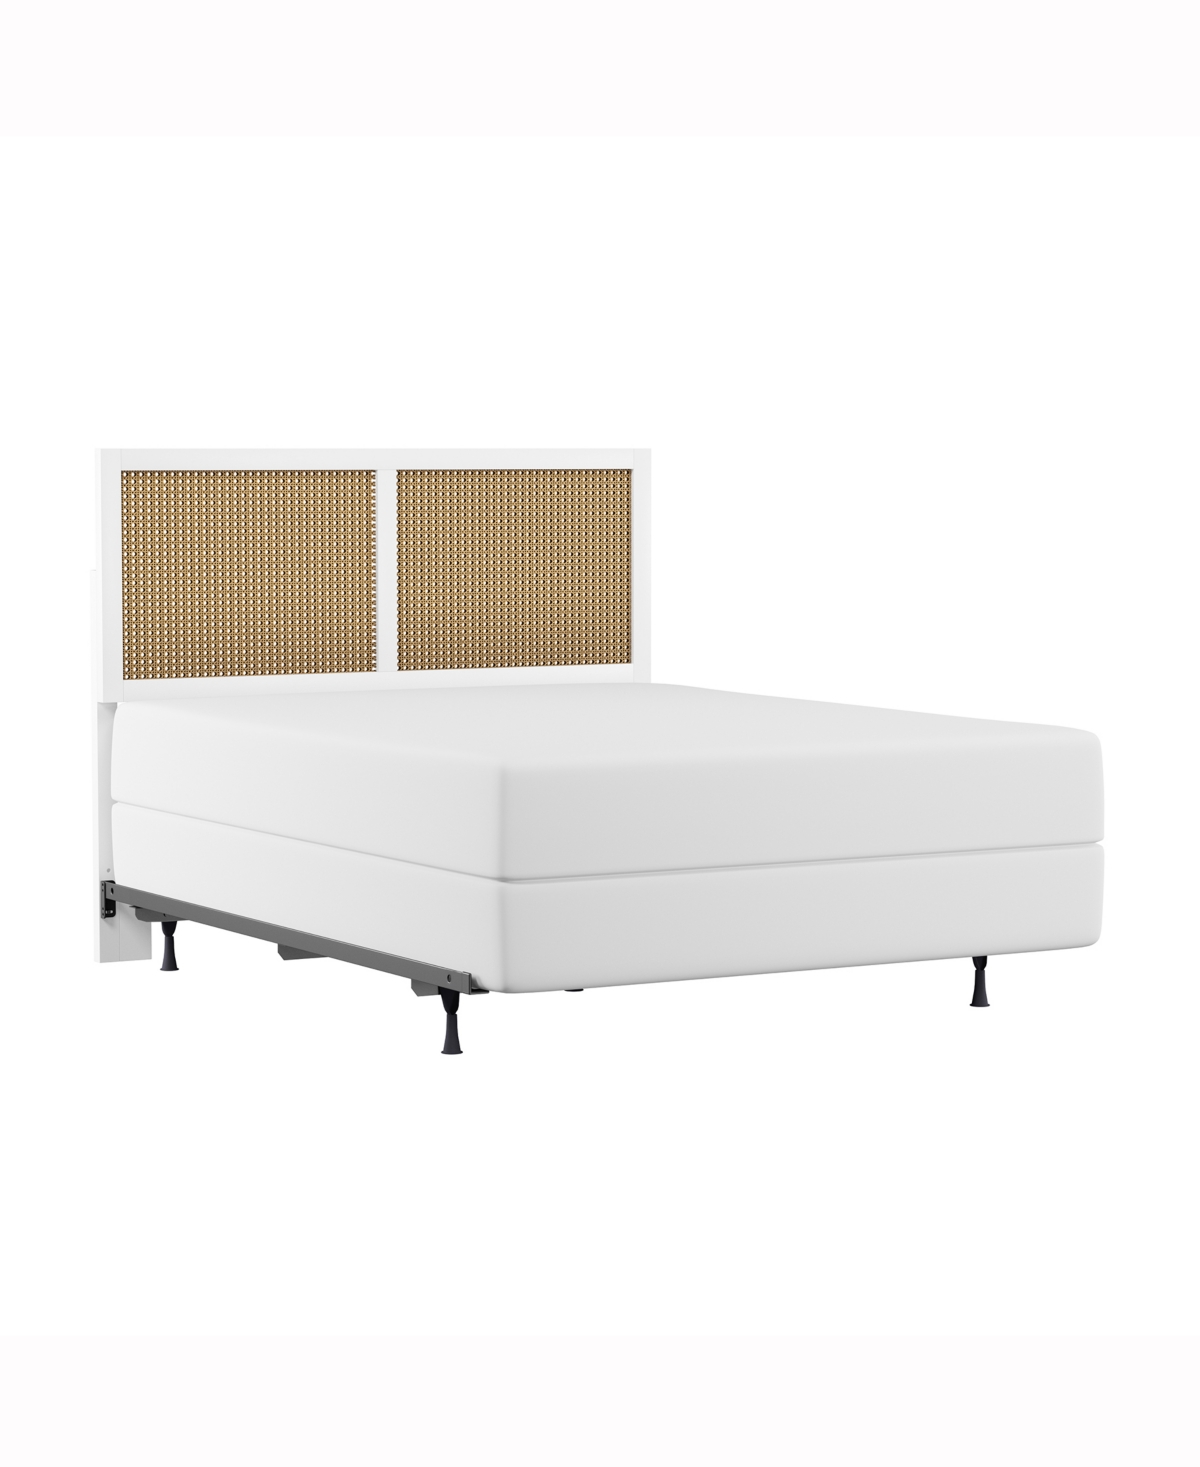 Hillsdale 50" Wood And Cane Panel Serena Furniture Full/queen Headboard With Frame In White